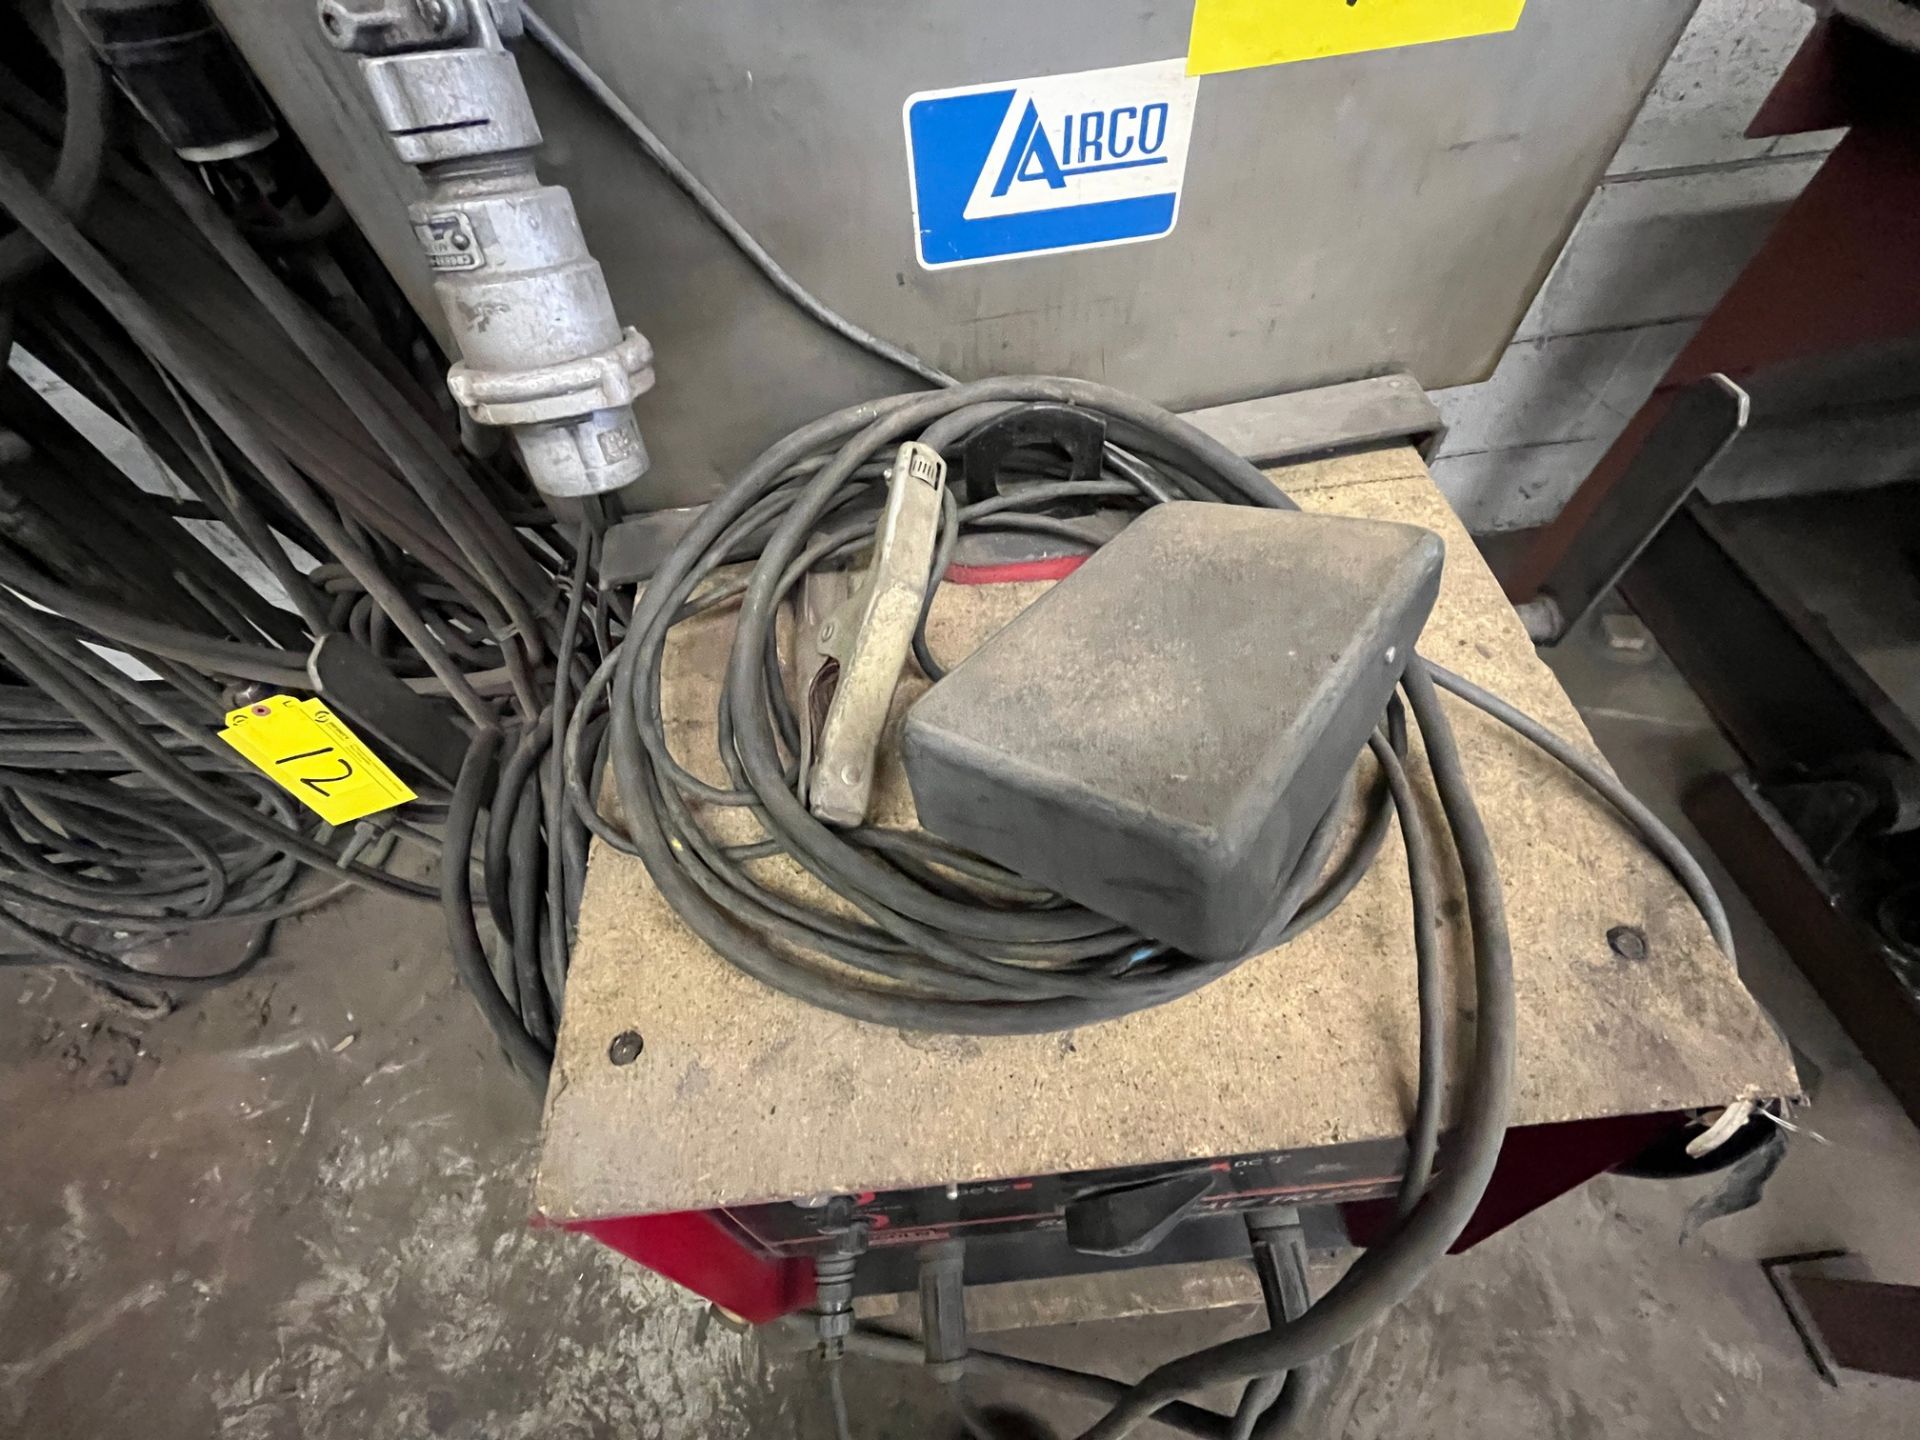 LINCOLN ELECTRIC SQUARE WAVE TIG 275 WELDER W/ AIRCO COOLING UNIT, CABLES, ETC. (NO TANKS) - Image 4 of 5